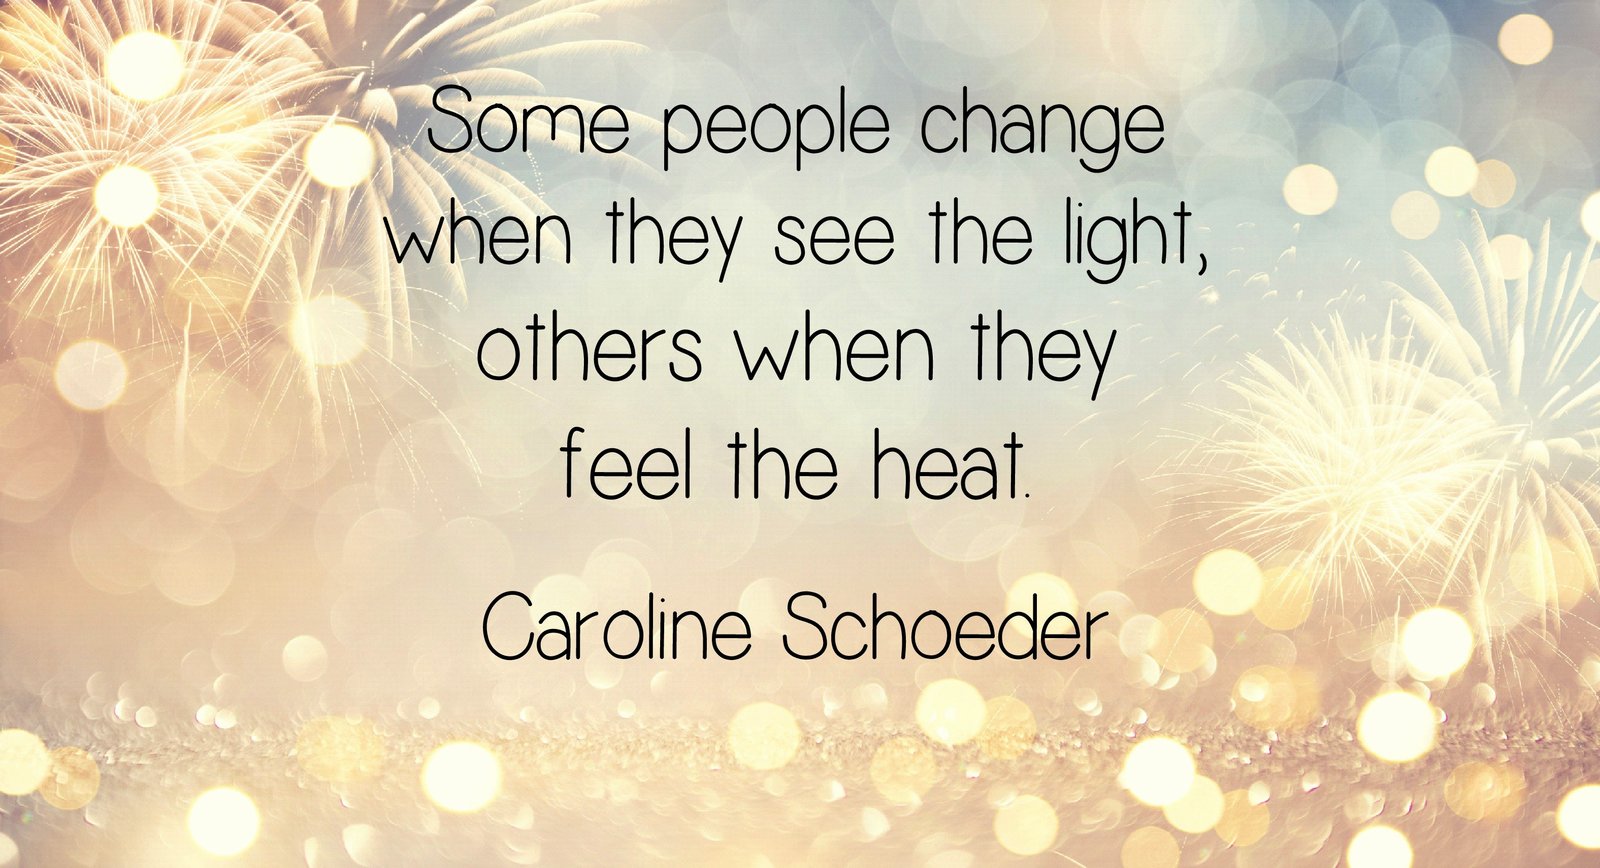 Some people change when they see the light